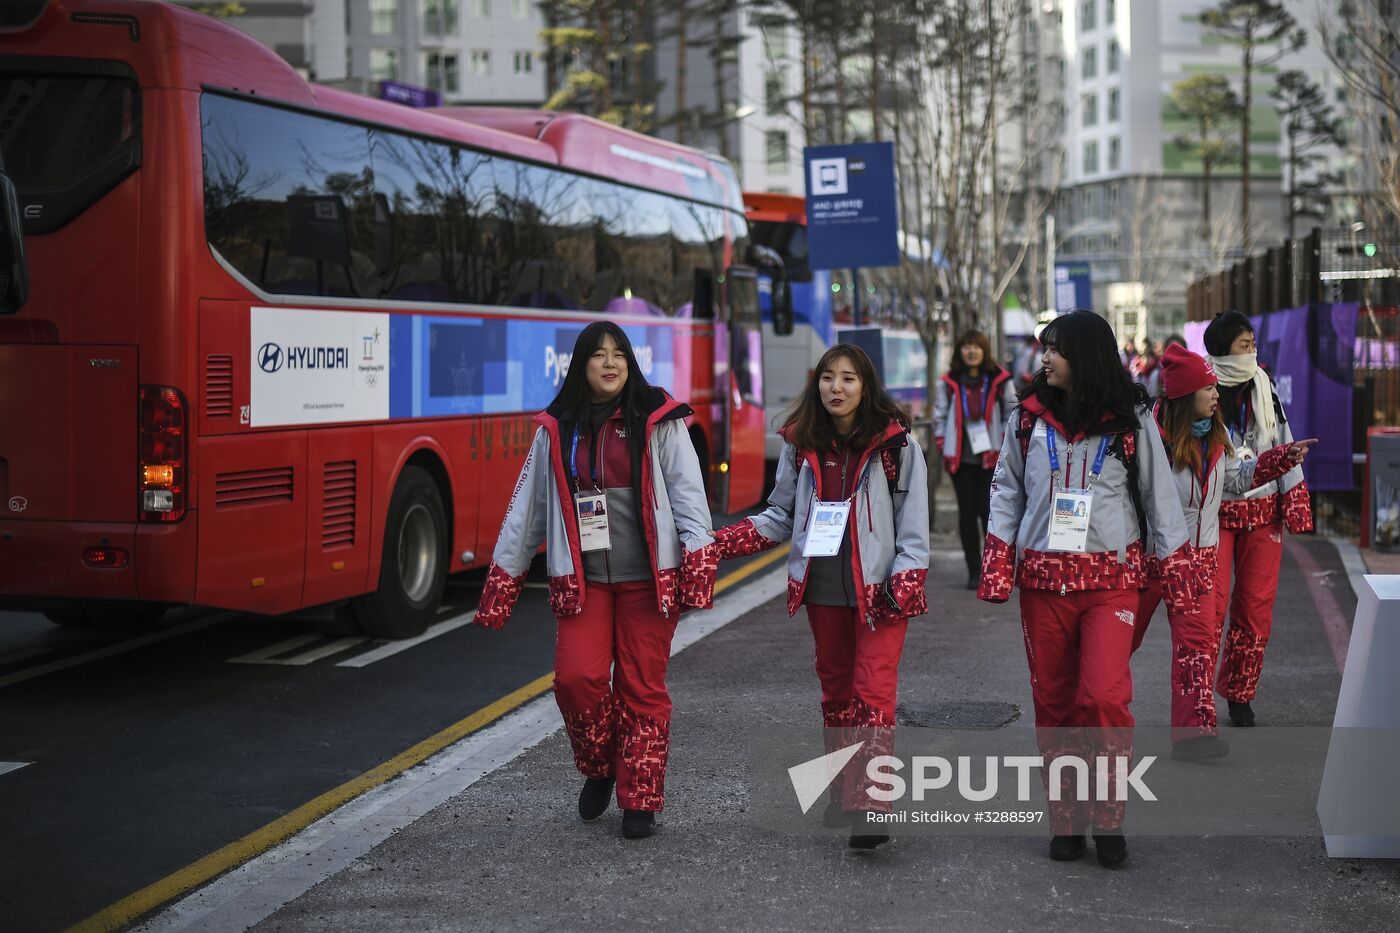 Preparing for 2018 Winter Olympics in Pyeongchang